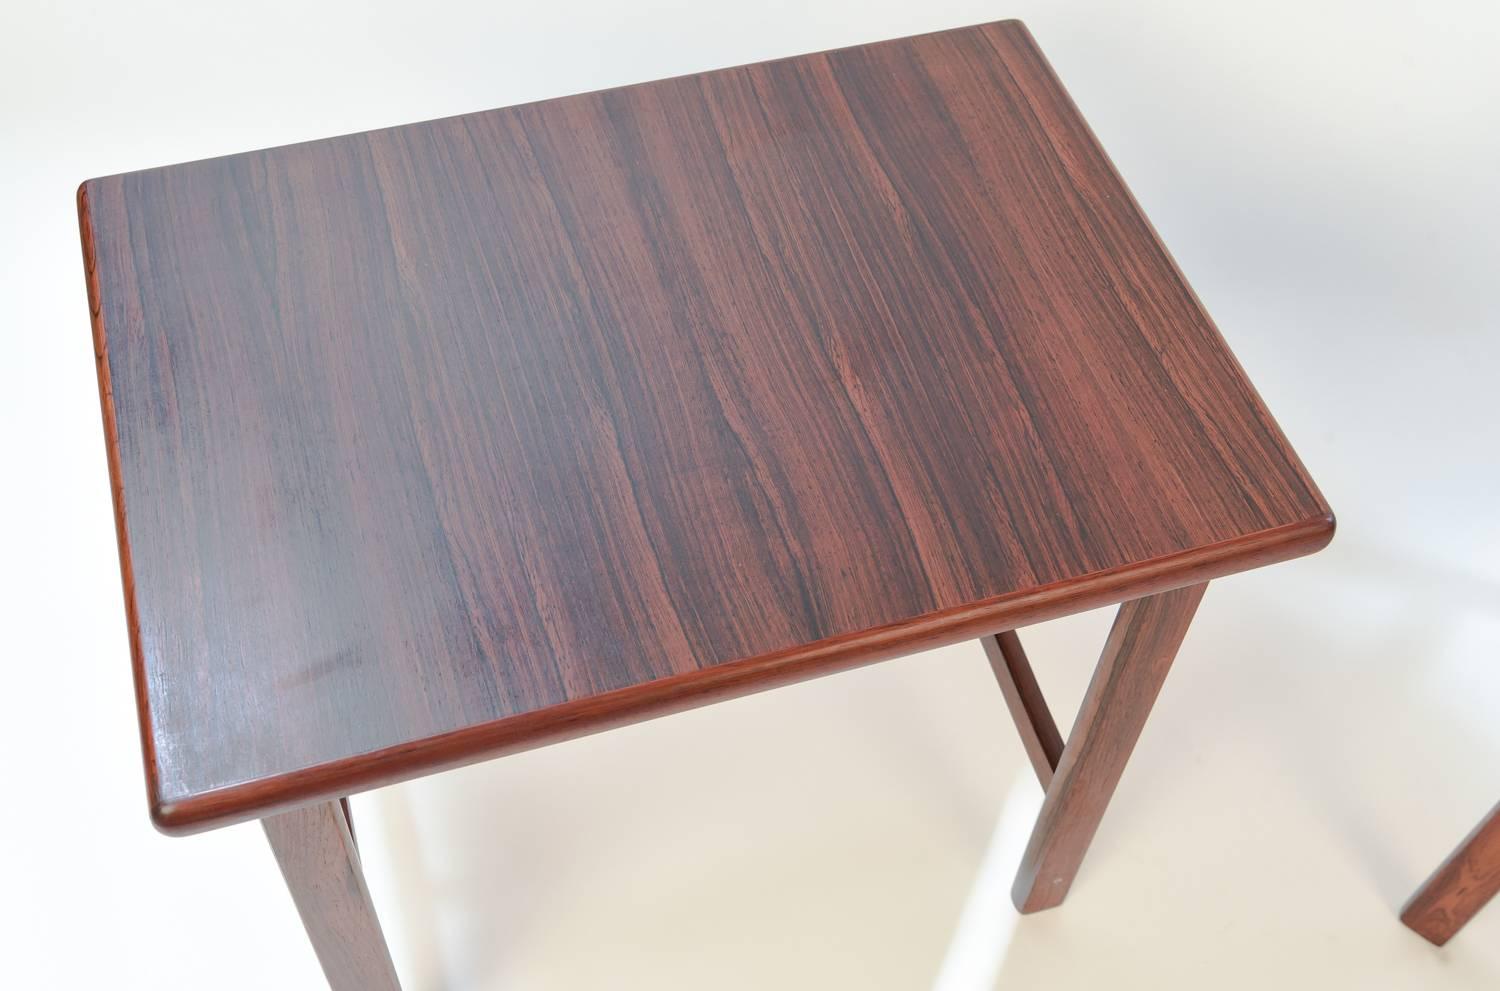 This lovely pair of Danish midcentury side tables feature handsome rosewood with exquisite color and grain. A wonderful, simple design that gives a handsome appearance.